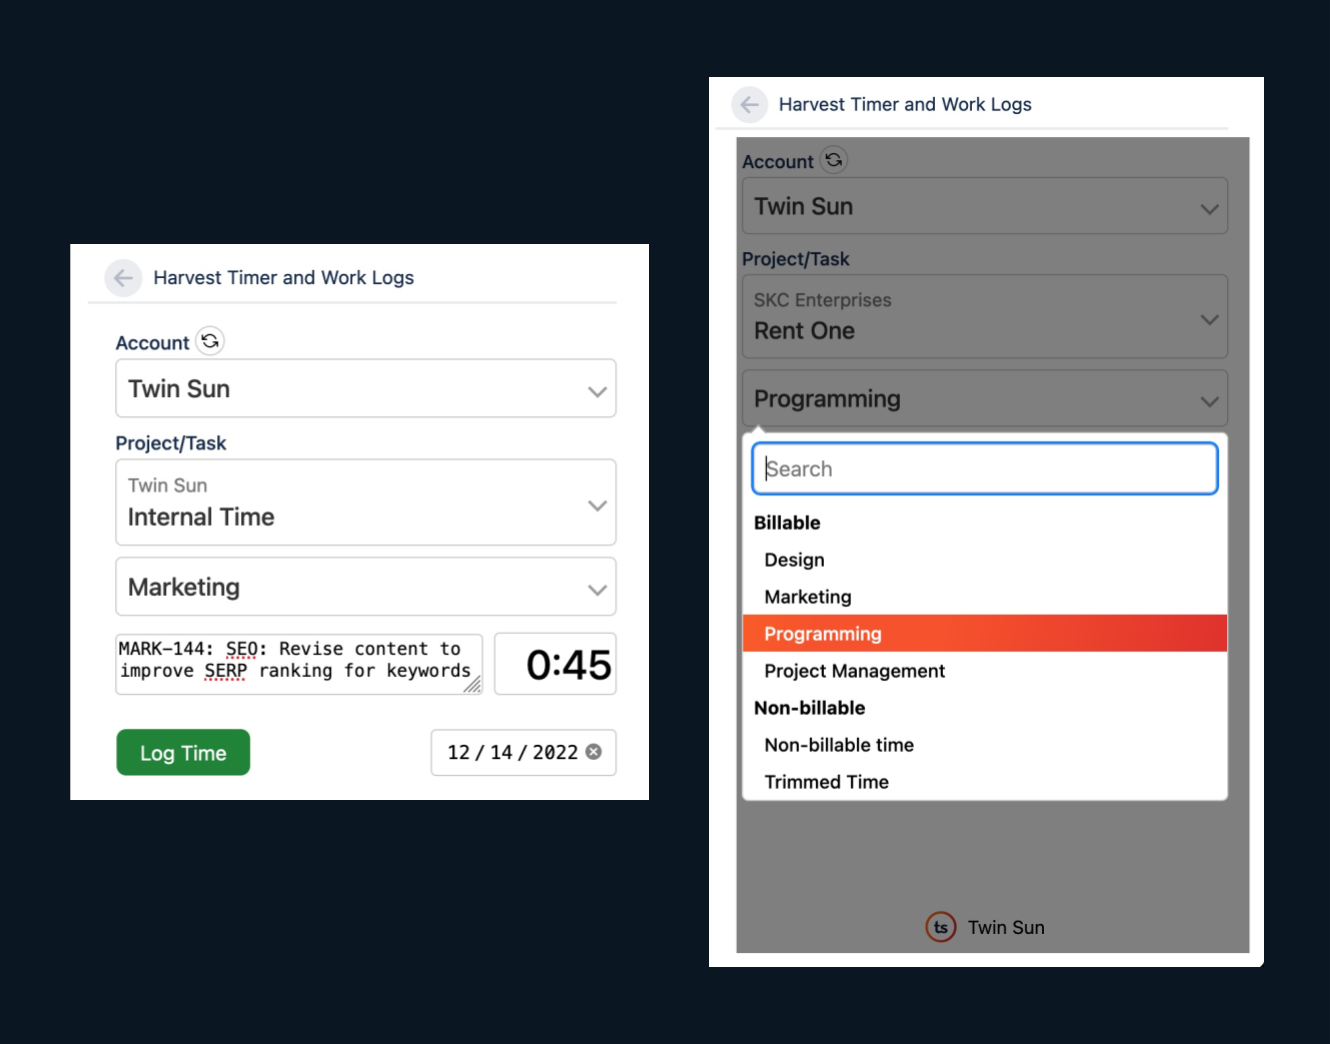 Screenshots of the Harvest Timer and Work Logs App for Jira Cloud